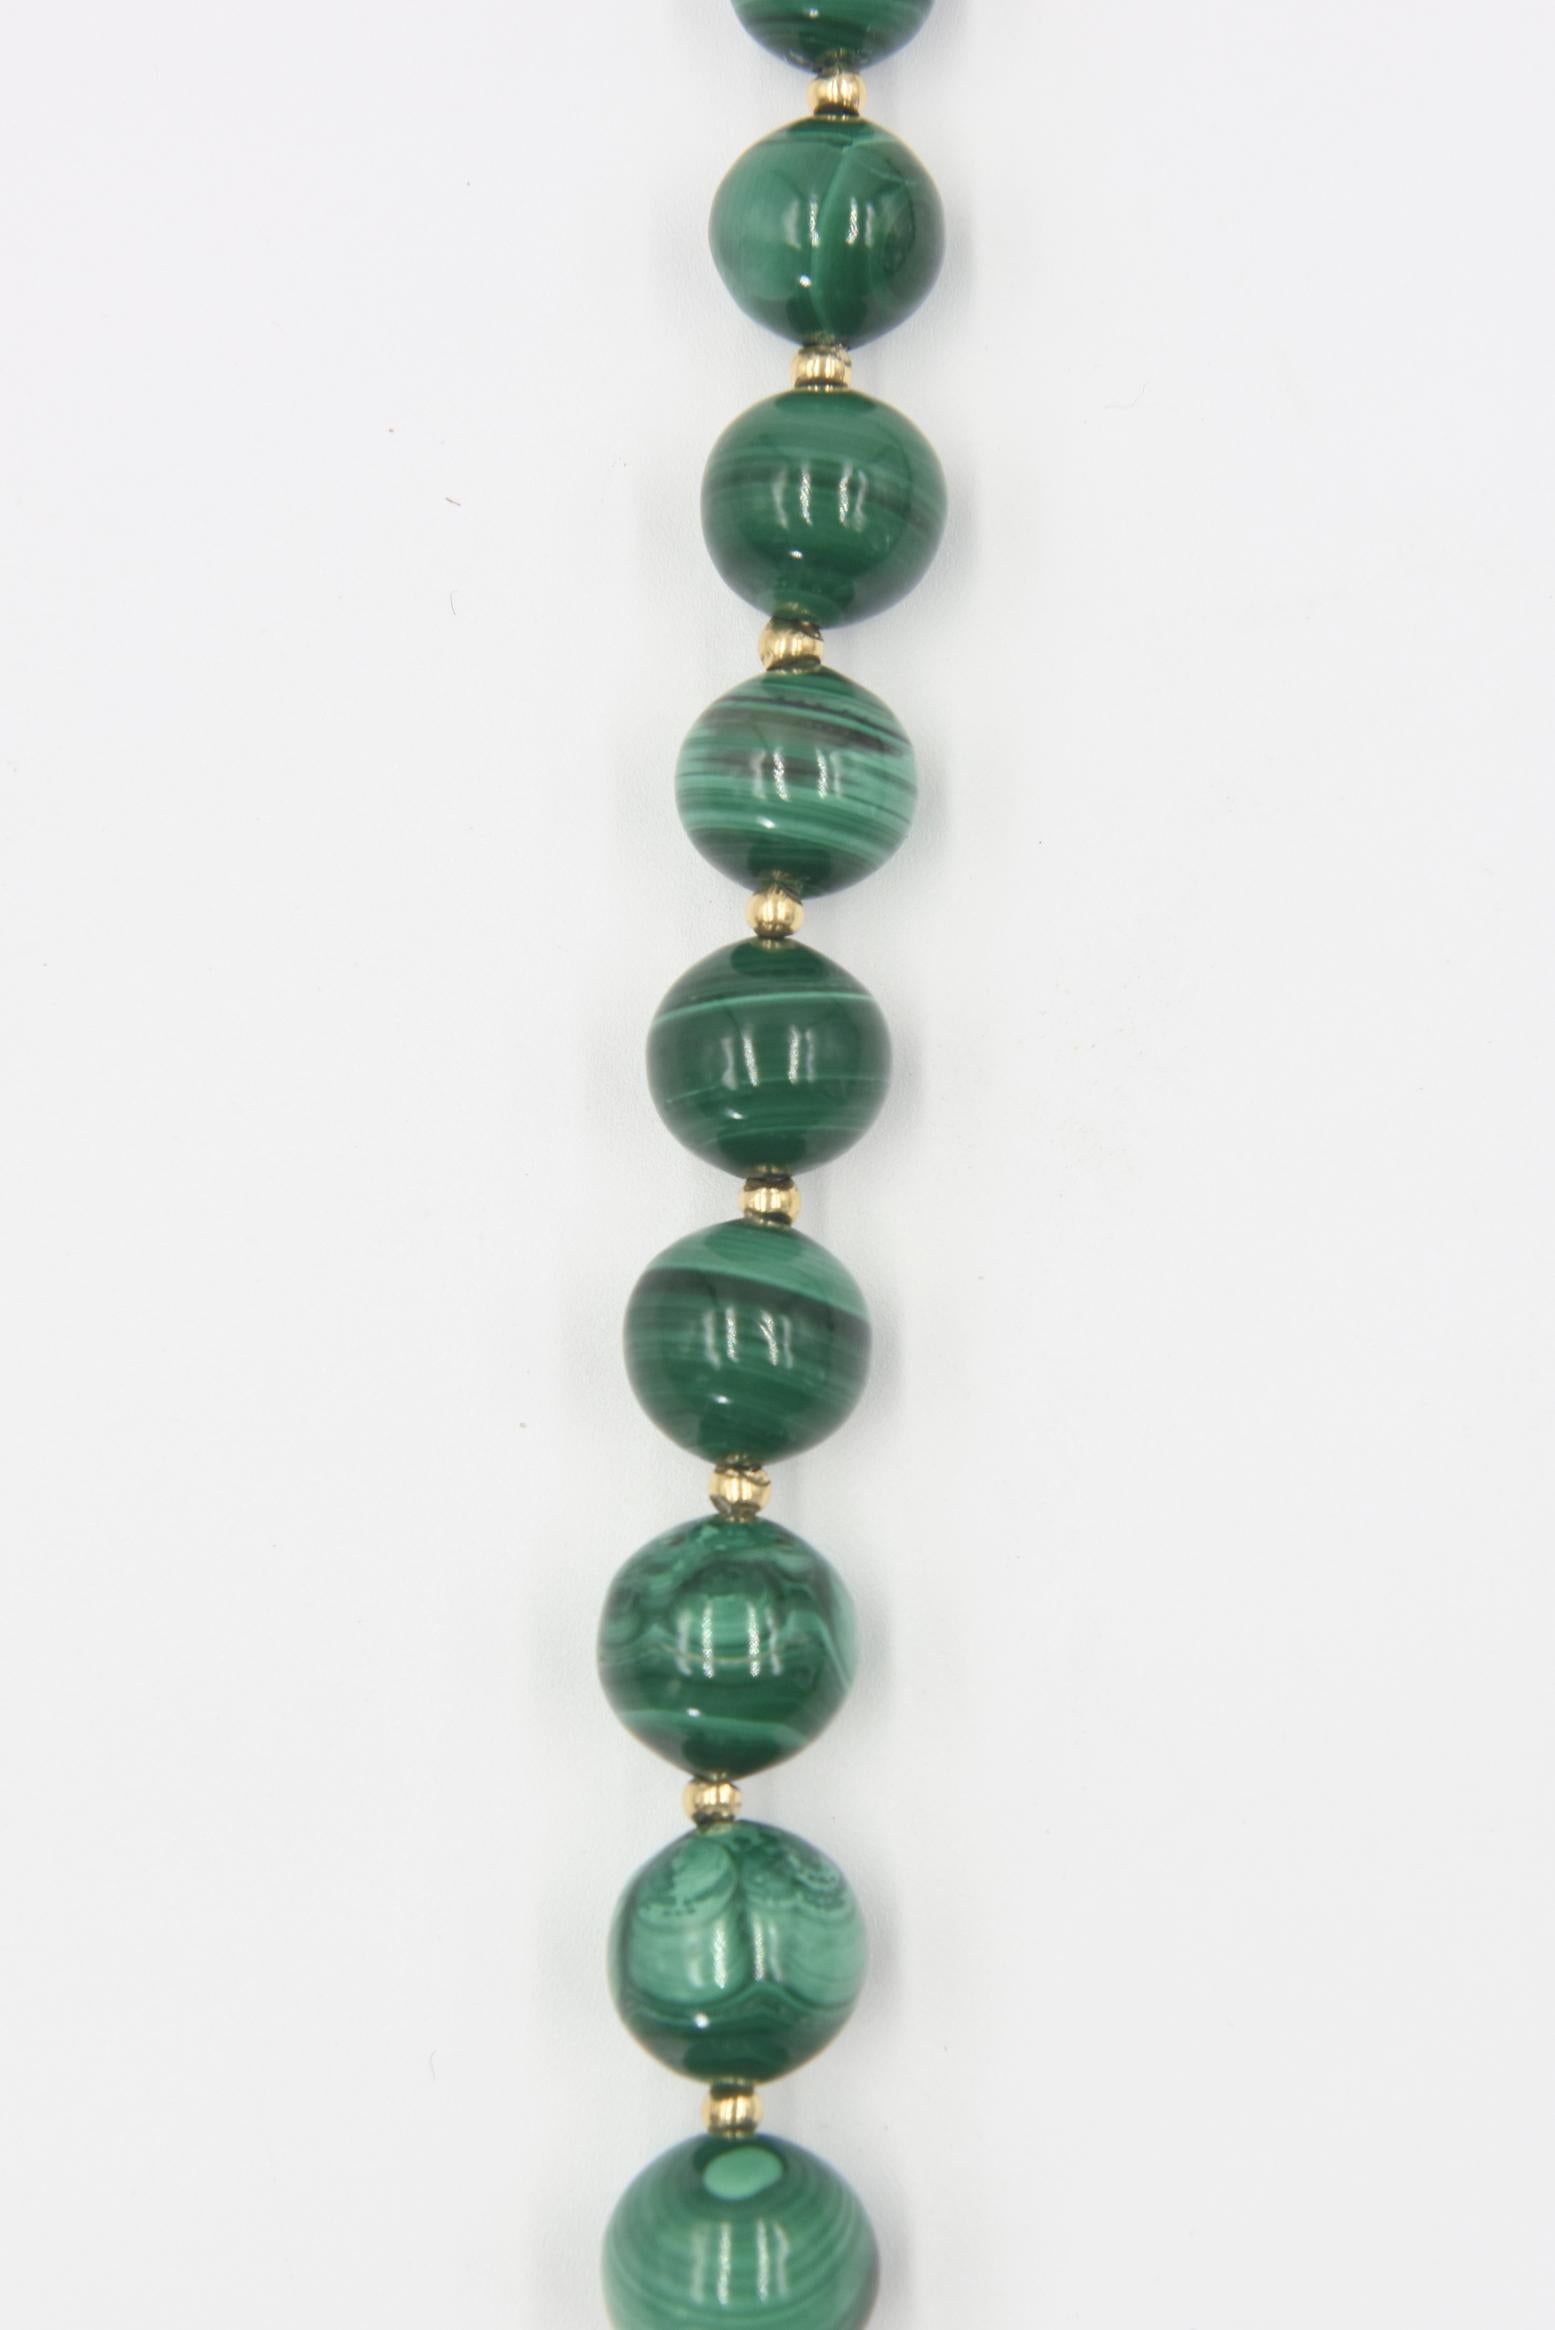 Graduated strand of 15.9 mm to 8.6 mm malachite beads interspersed with small 2.8 mm gold-plated beads terminating in a gold-plated filigree sterling silver clasp